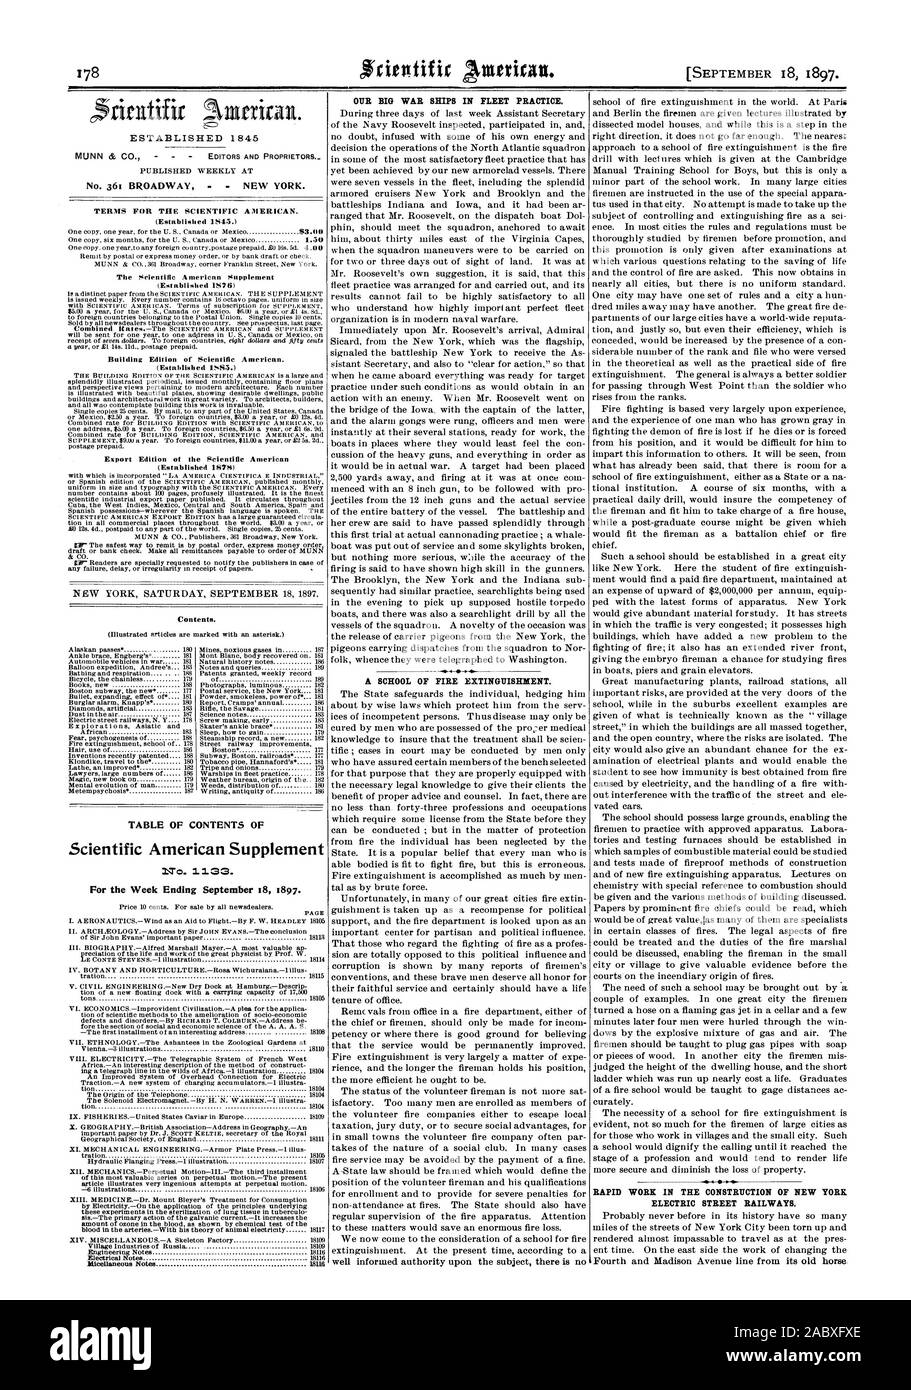 ESTABLISHED 1845 MUNN 86 CO.   EDITORS AND PROPRIETORS. TERMS FOR THE SCIENTIFIC AMERICAN. The Scientific American Supplement (Established 1876) Building Edition of Scientific American. (Established 1SS5.) (Established 1878) Contents. Scientific American Supplement No. 33. For the Week Ending September [8 1897. PAGE tion of a new floating dock with a carrying capacity of 17500 tons 18105 VI. ECONOM1CS.-Improvident Civilization.-A plea for the applica tion of scientific methods to the amelioration of socio-economic fore the section of social and economic science of the A. A. A. S. -The first Stock Photo